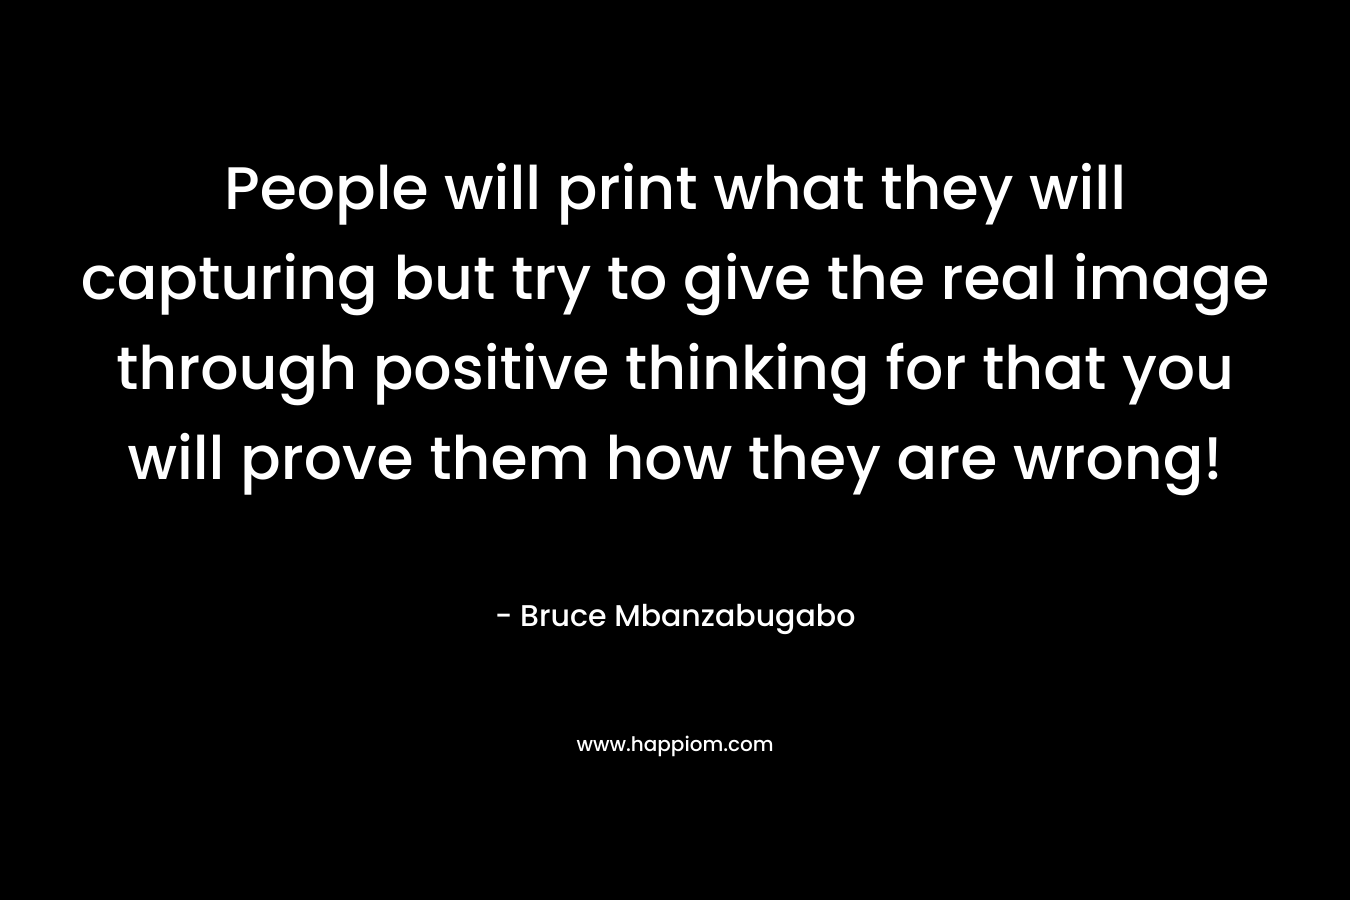 People will print what they will capturing but try to give the real image through positive thinking for that you will prove them how they are wrong! – Bruce Mbanzabugabo